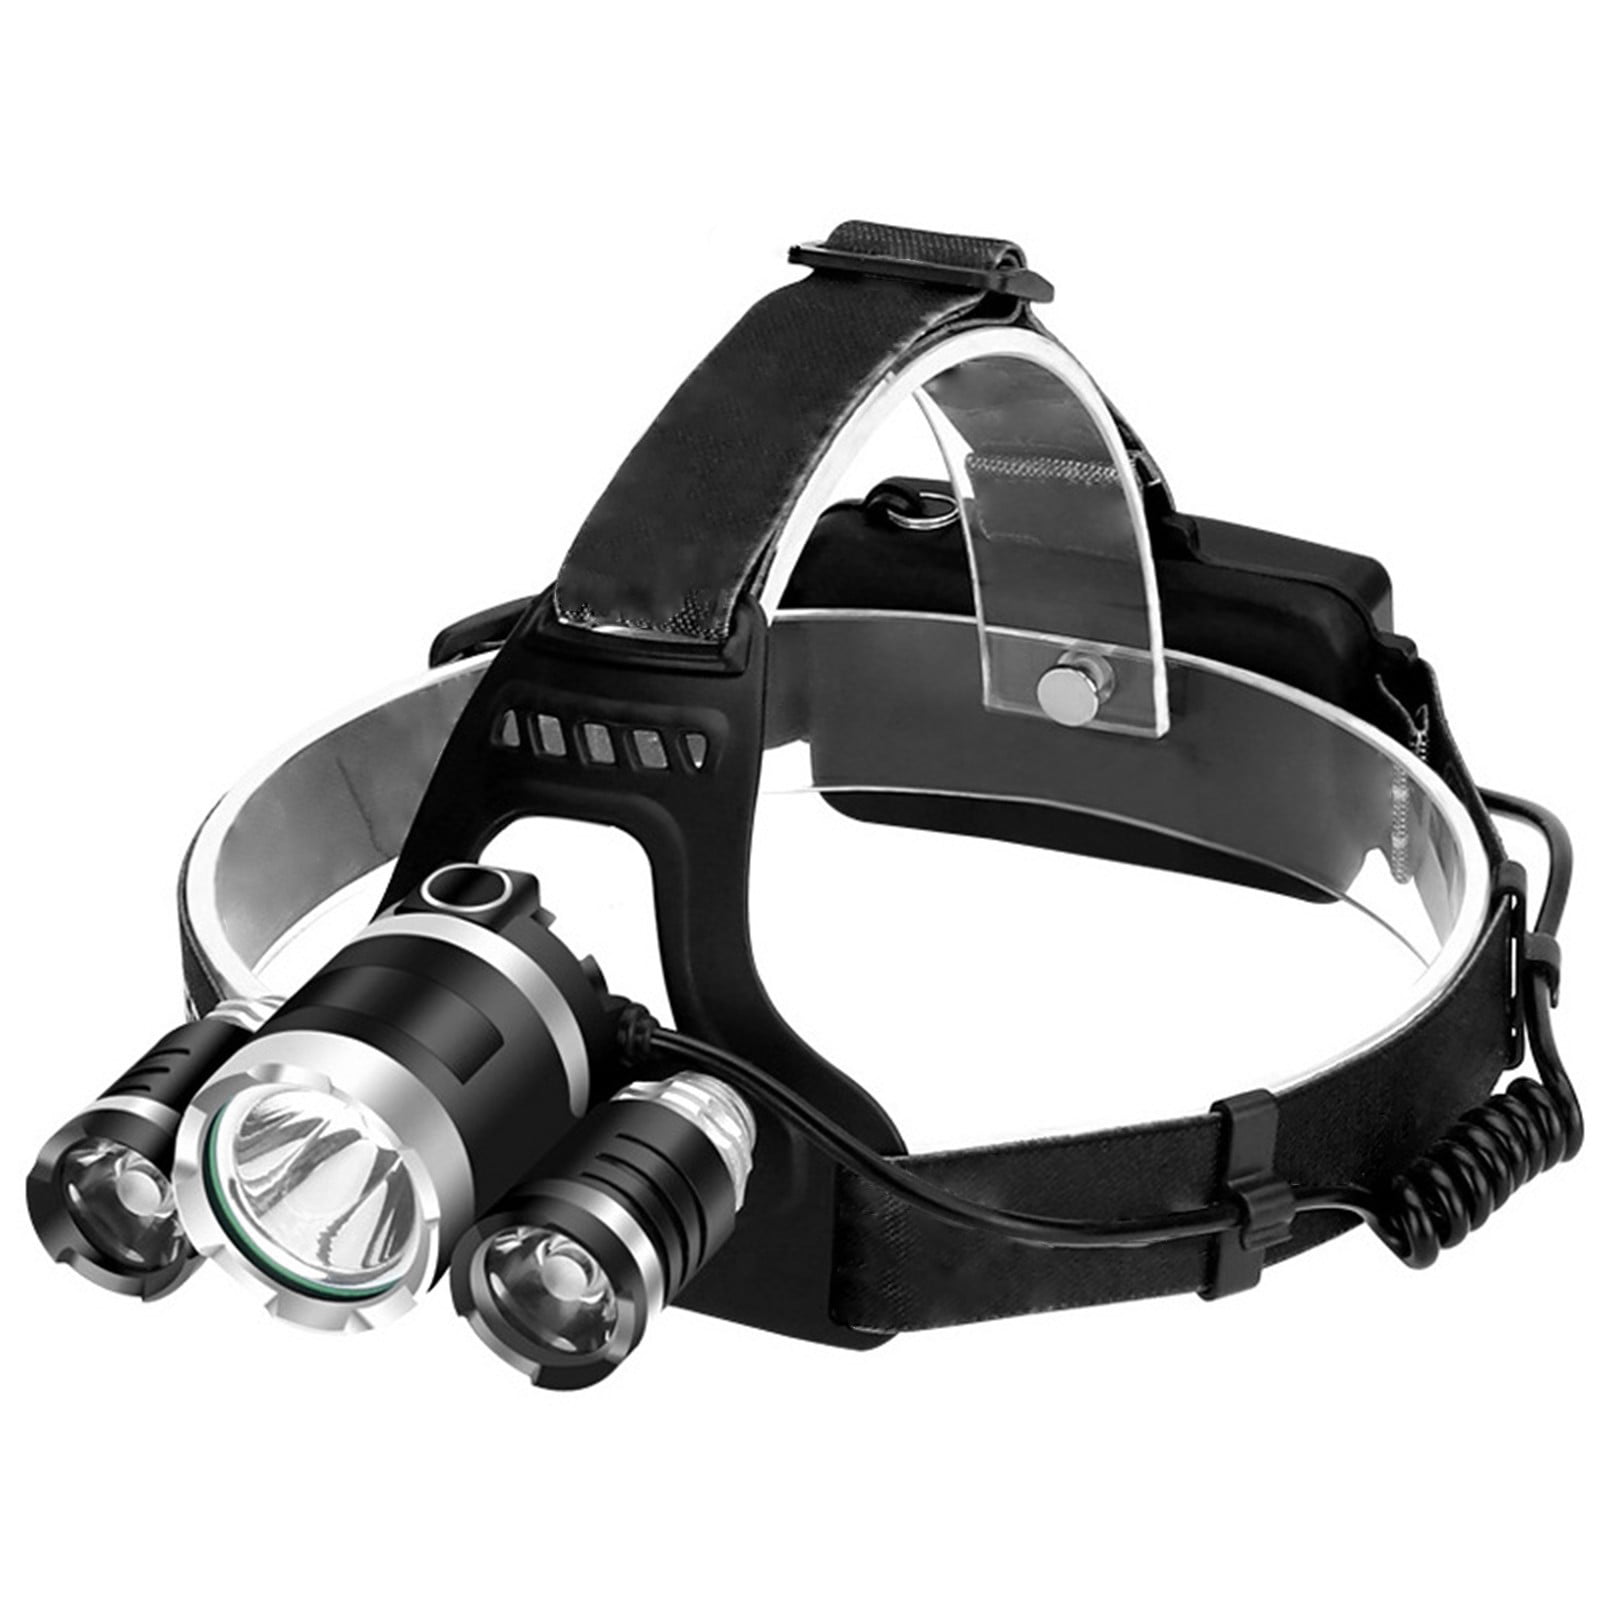 50000LM XM-L T6 Zoomable Headlamp  LED Flashlight 18650 Camping Headlight Torch 